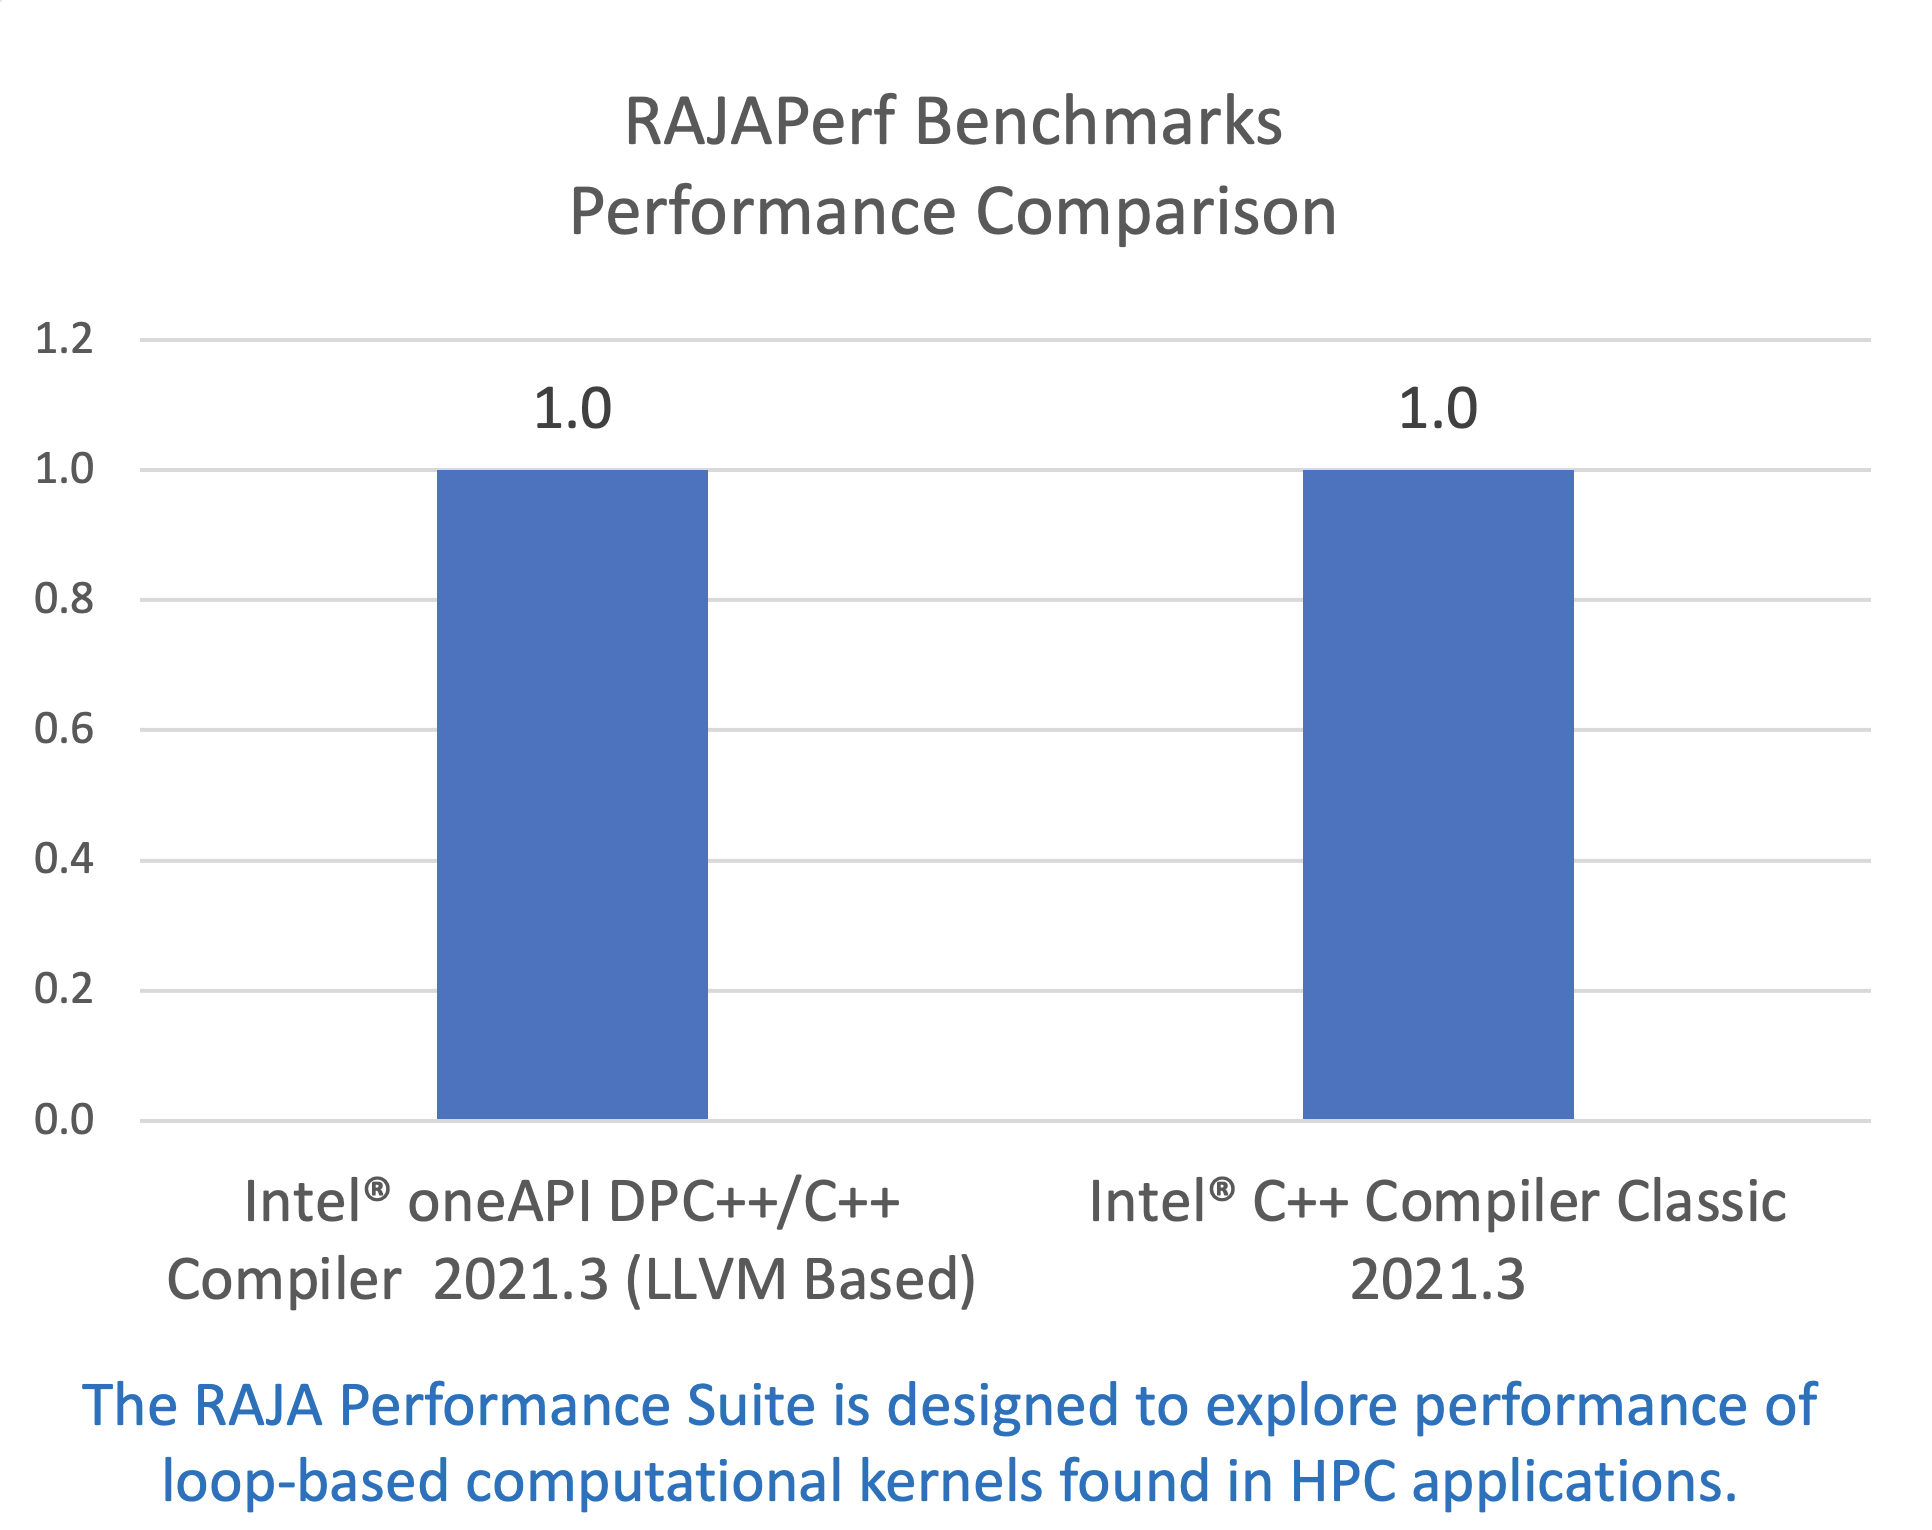 RAJA Performance Suite is designed to explore performance of loop-based computational kernels found in HPC applications